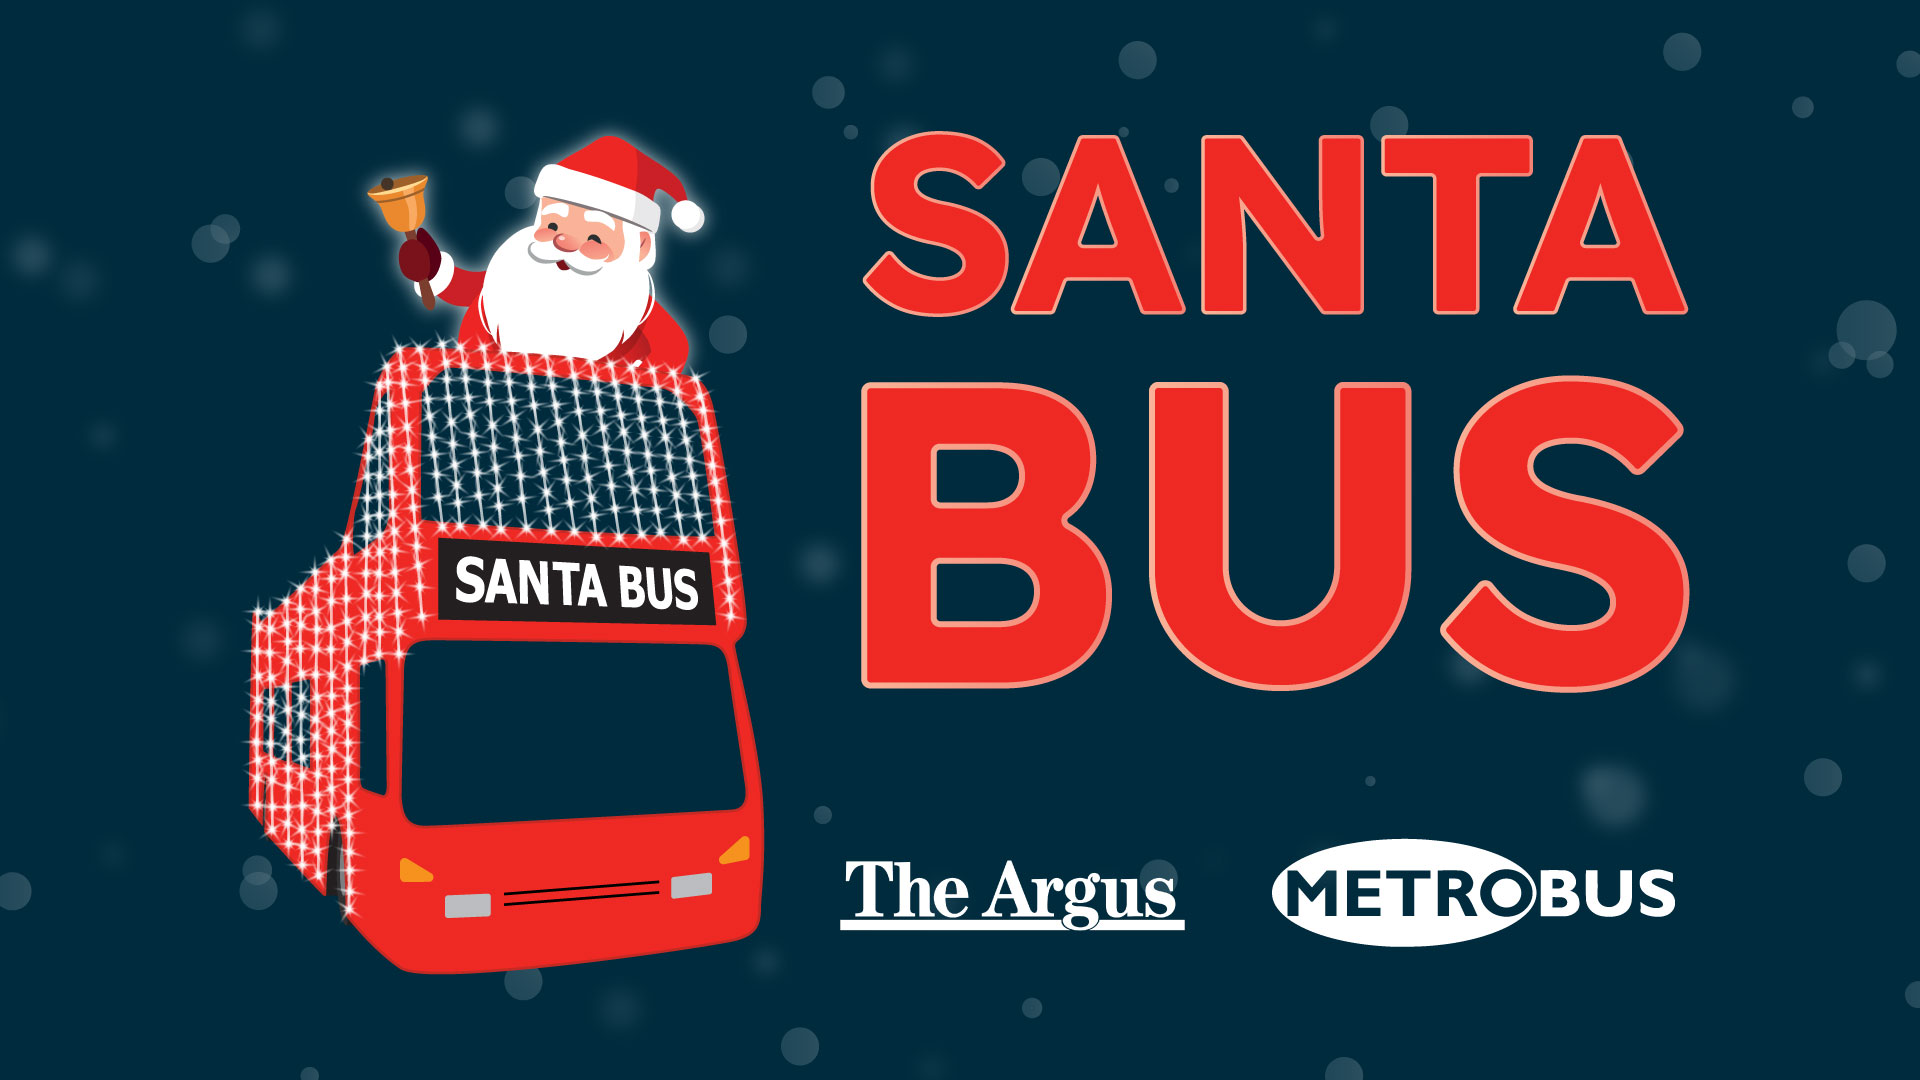 Image if the Santa Bus with text that says " Santa Bus"